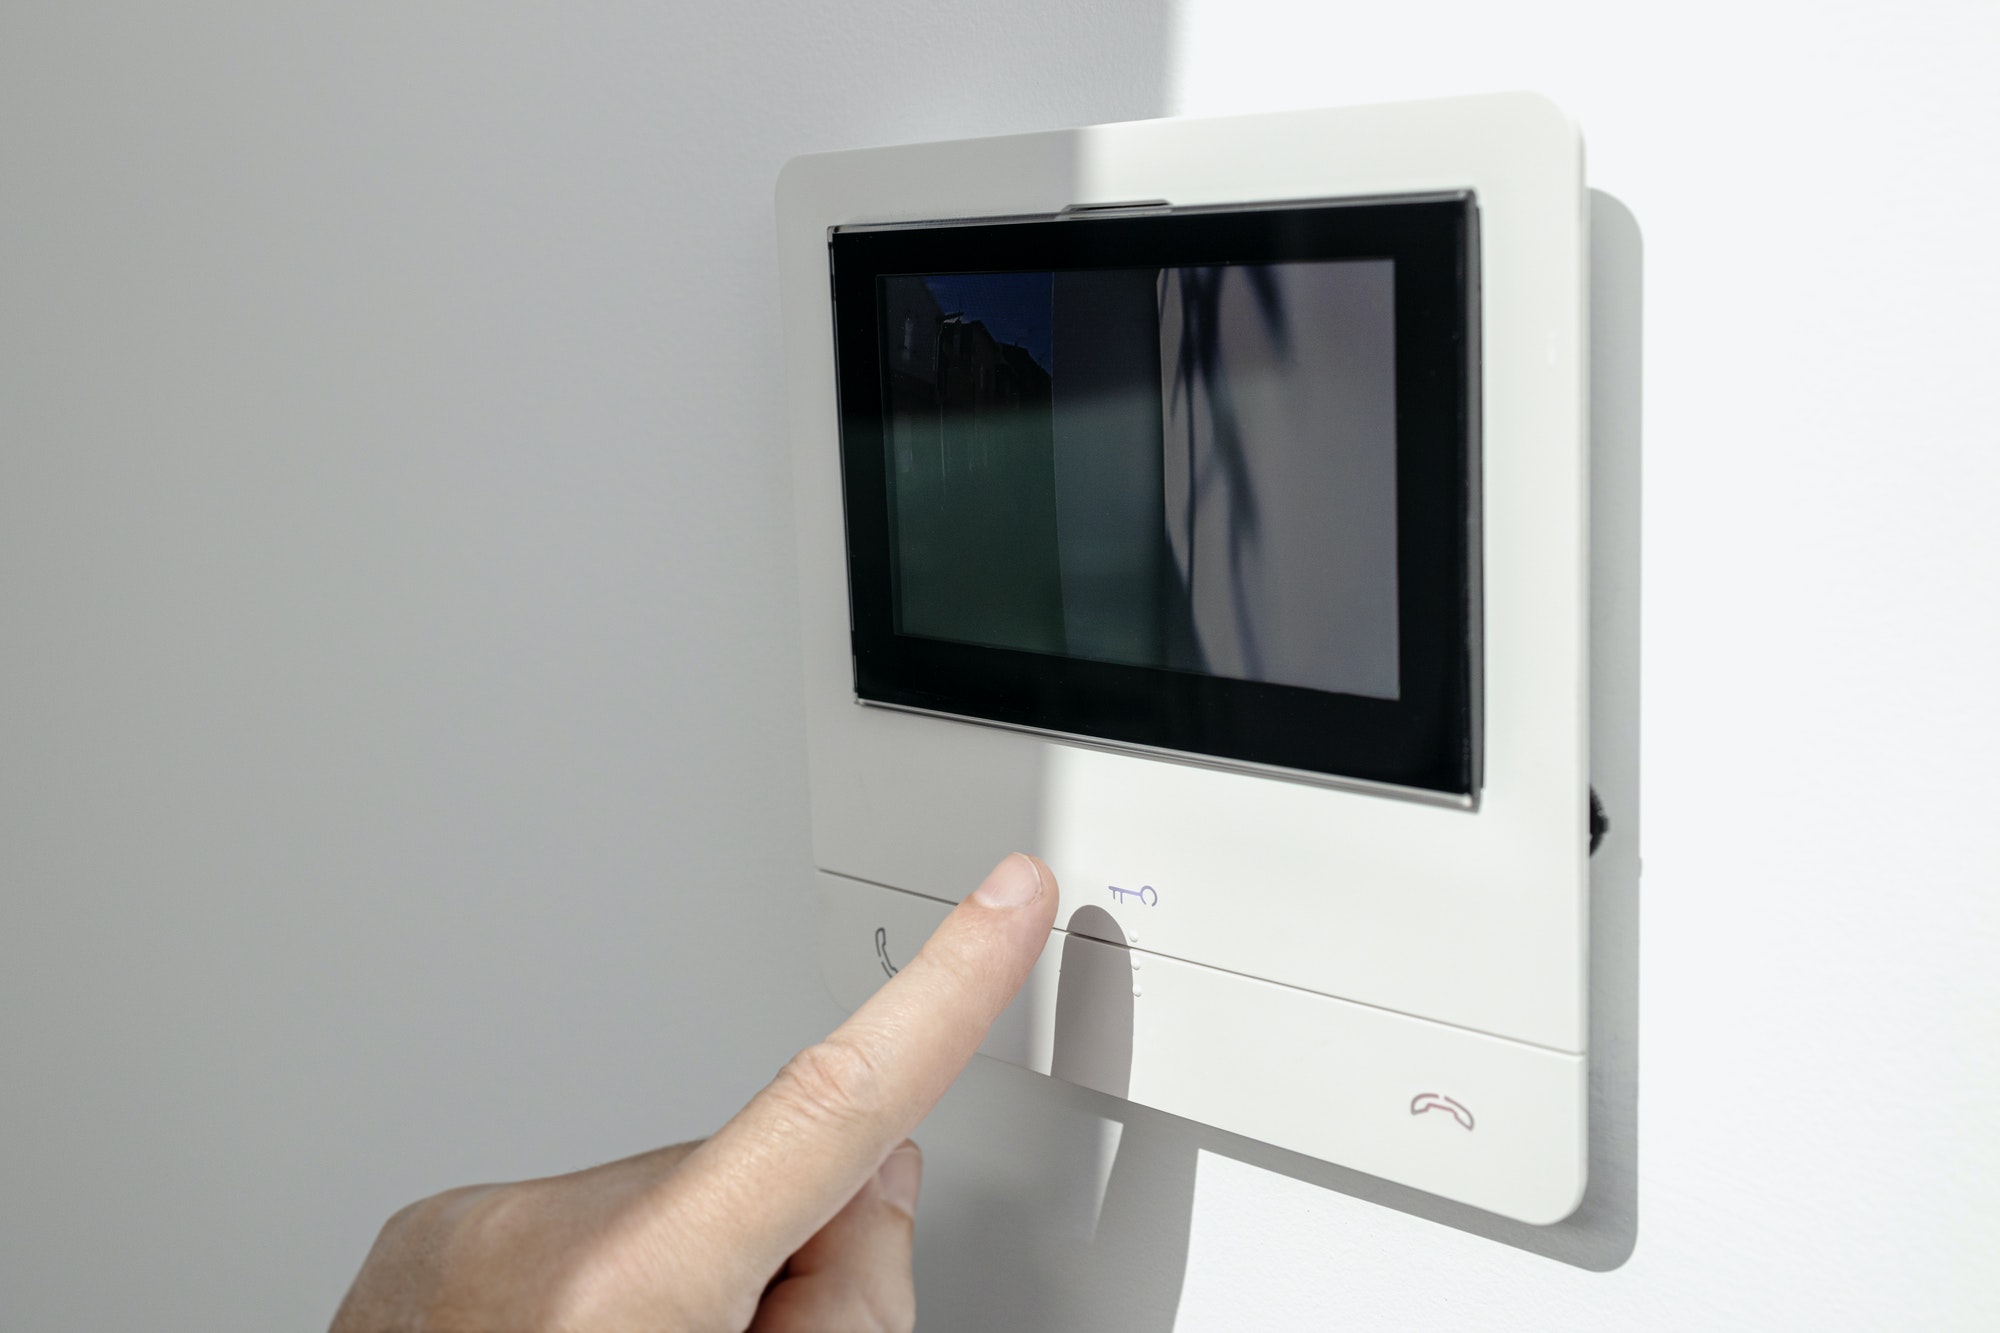 Intercom in home interior and a hand ready to open the door button